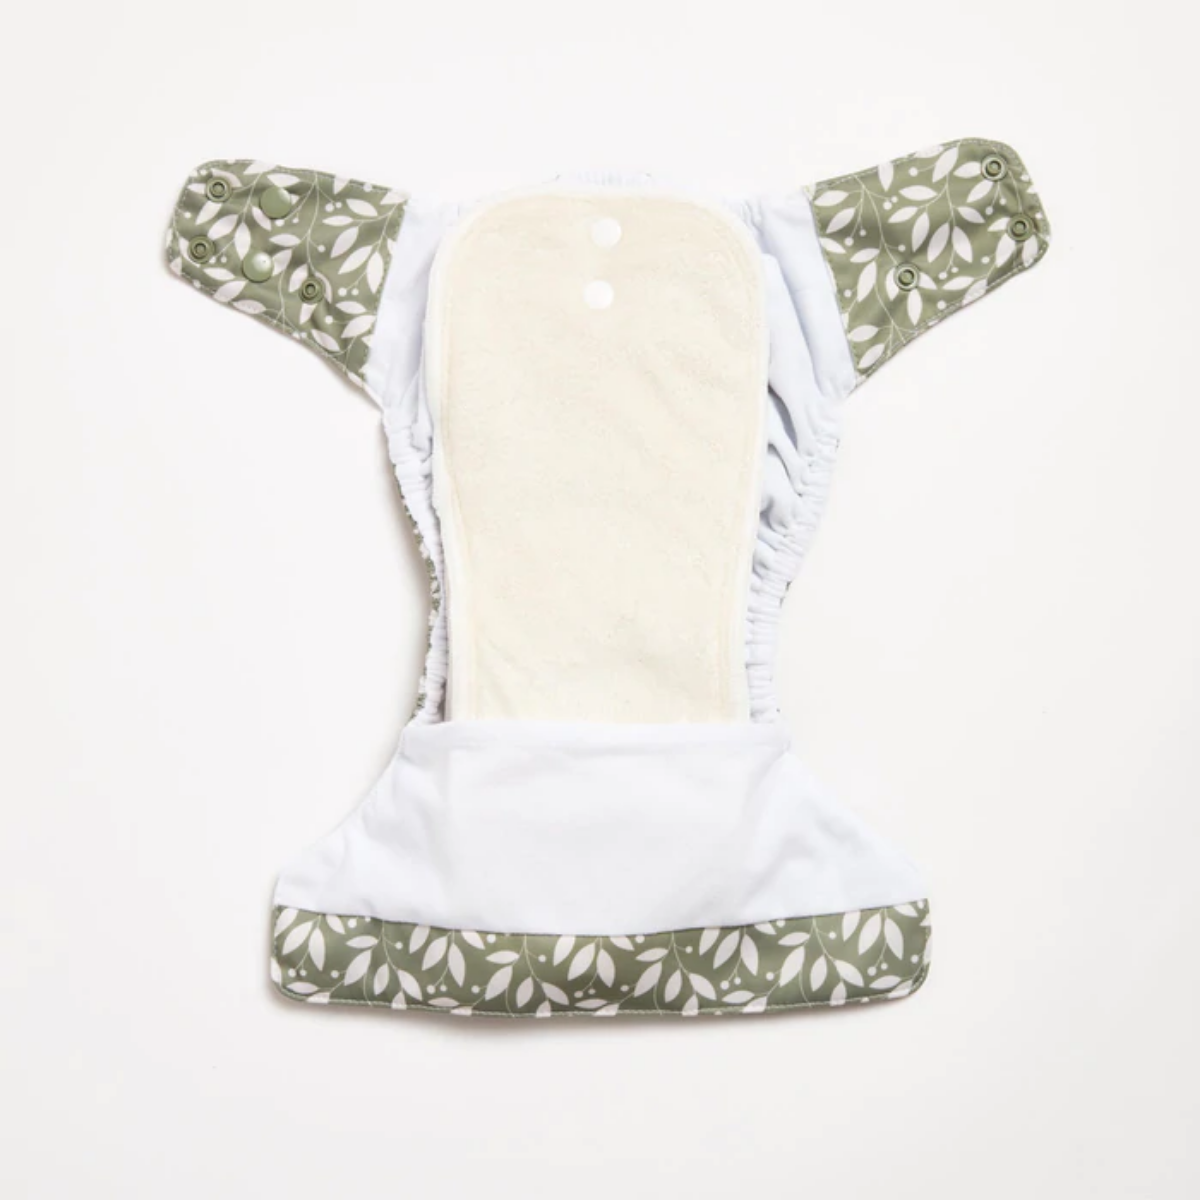 An open Sage 2.0 Modern Cloth Nappy by EcoNaps on a white surface.